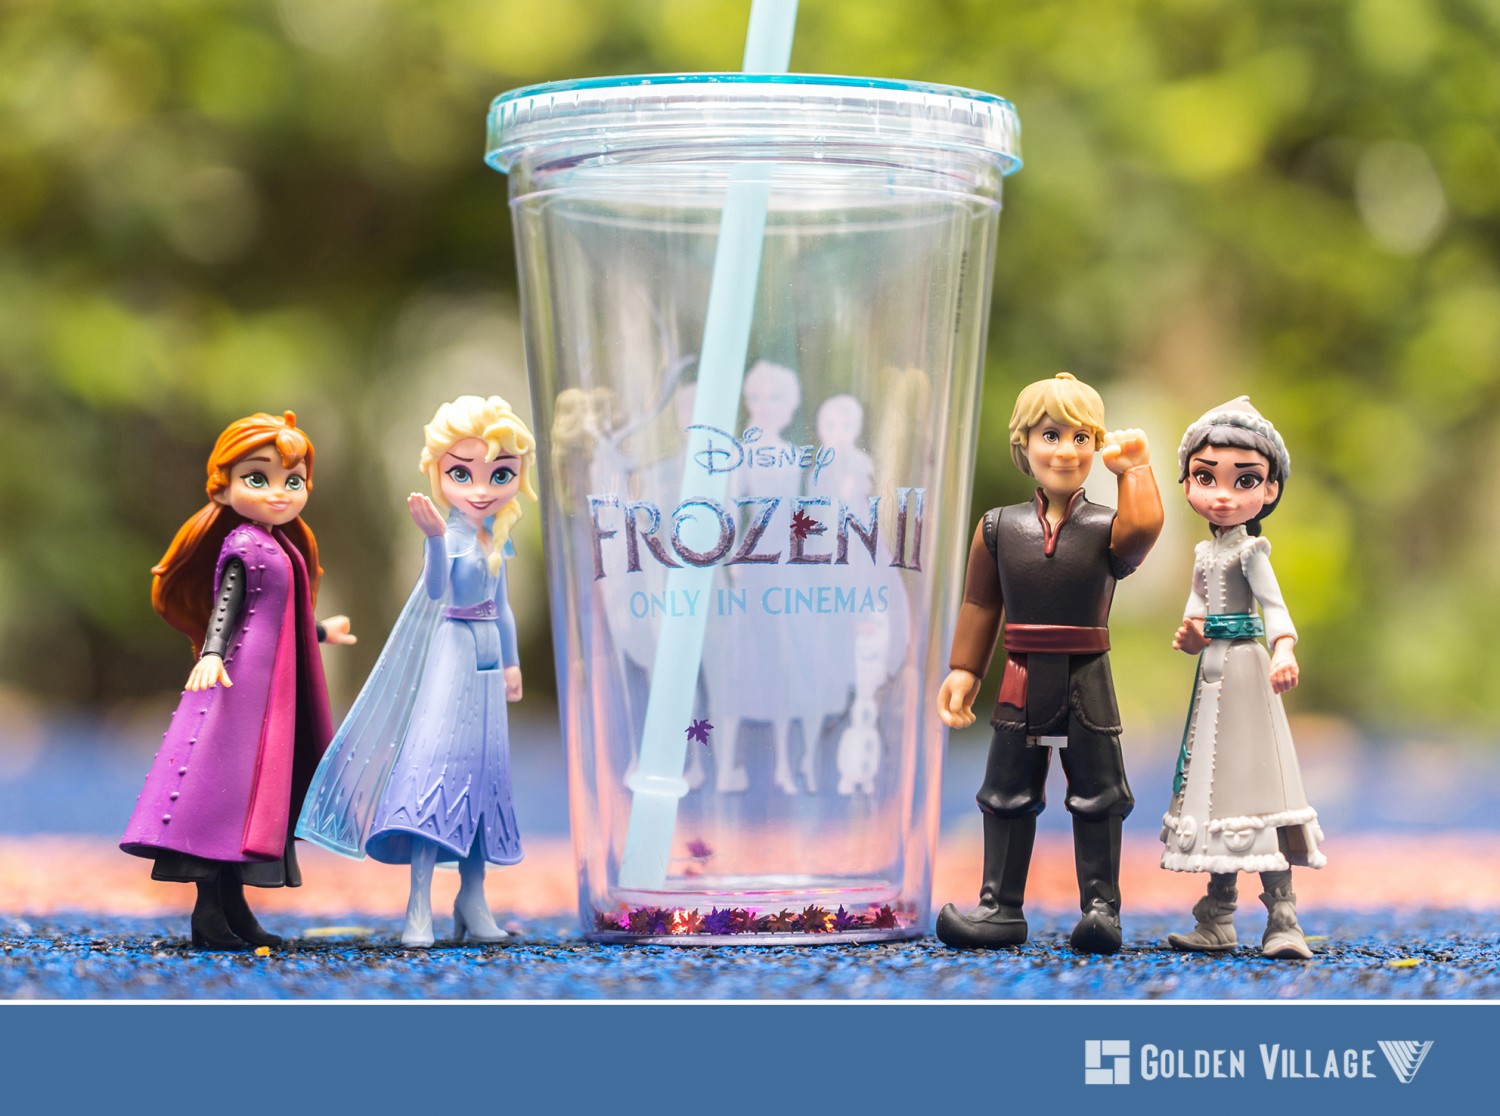 Exclusive Frozen 2 Singapore Cinema Goodies Are Coming Your Way